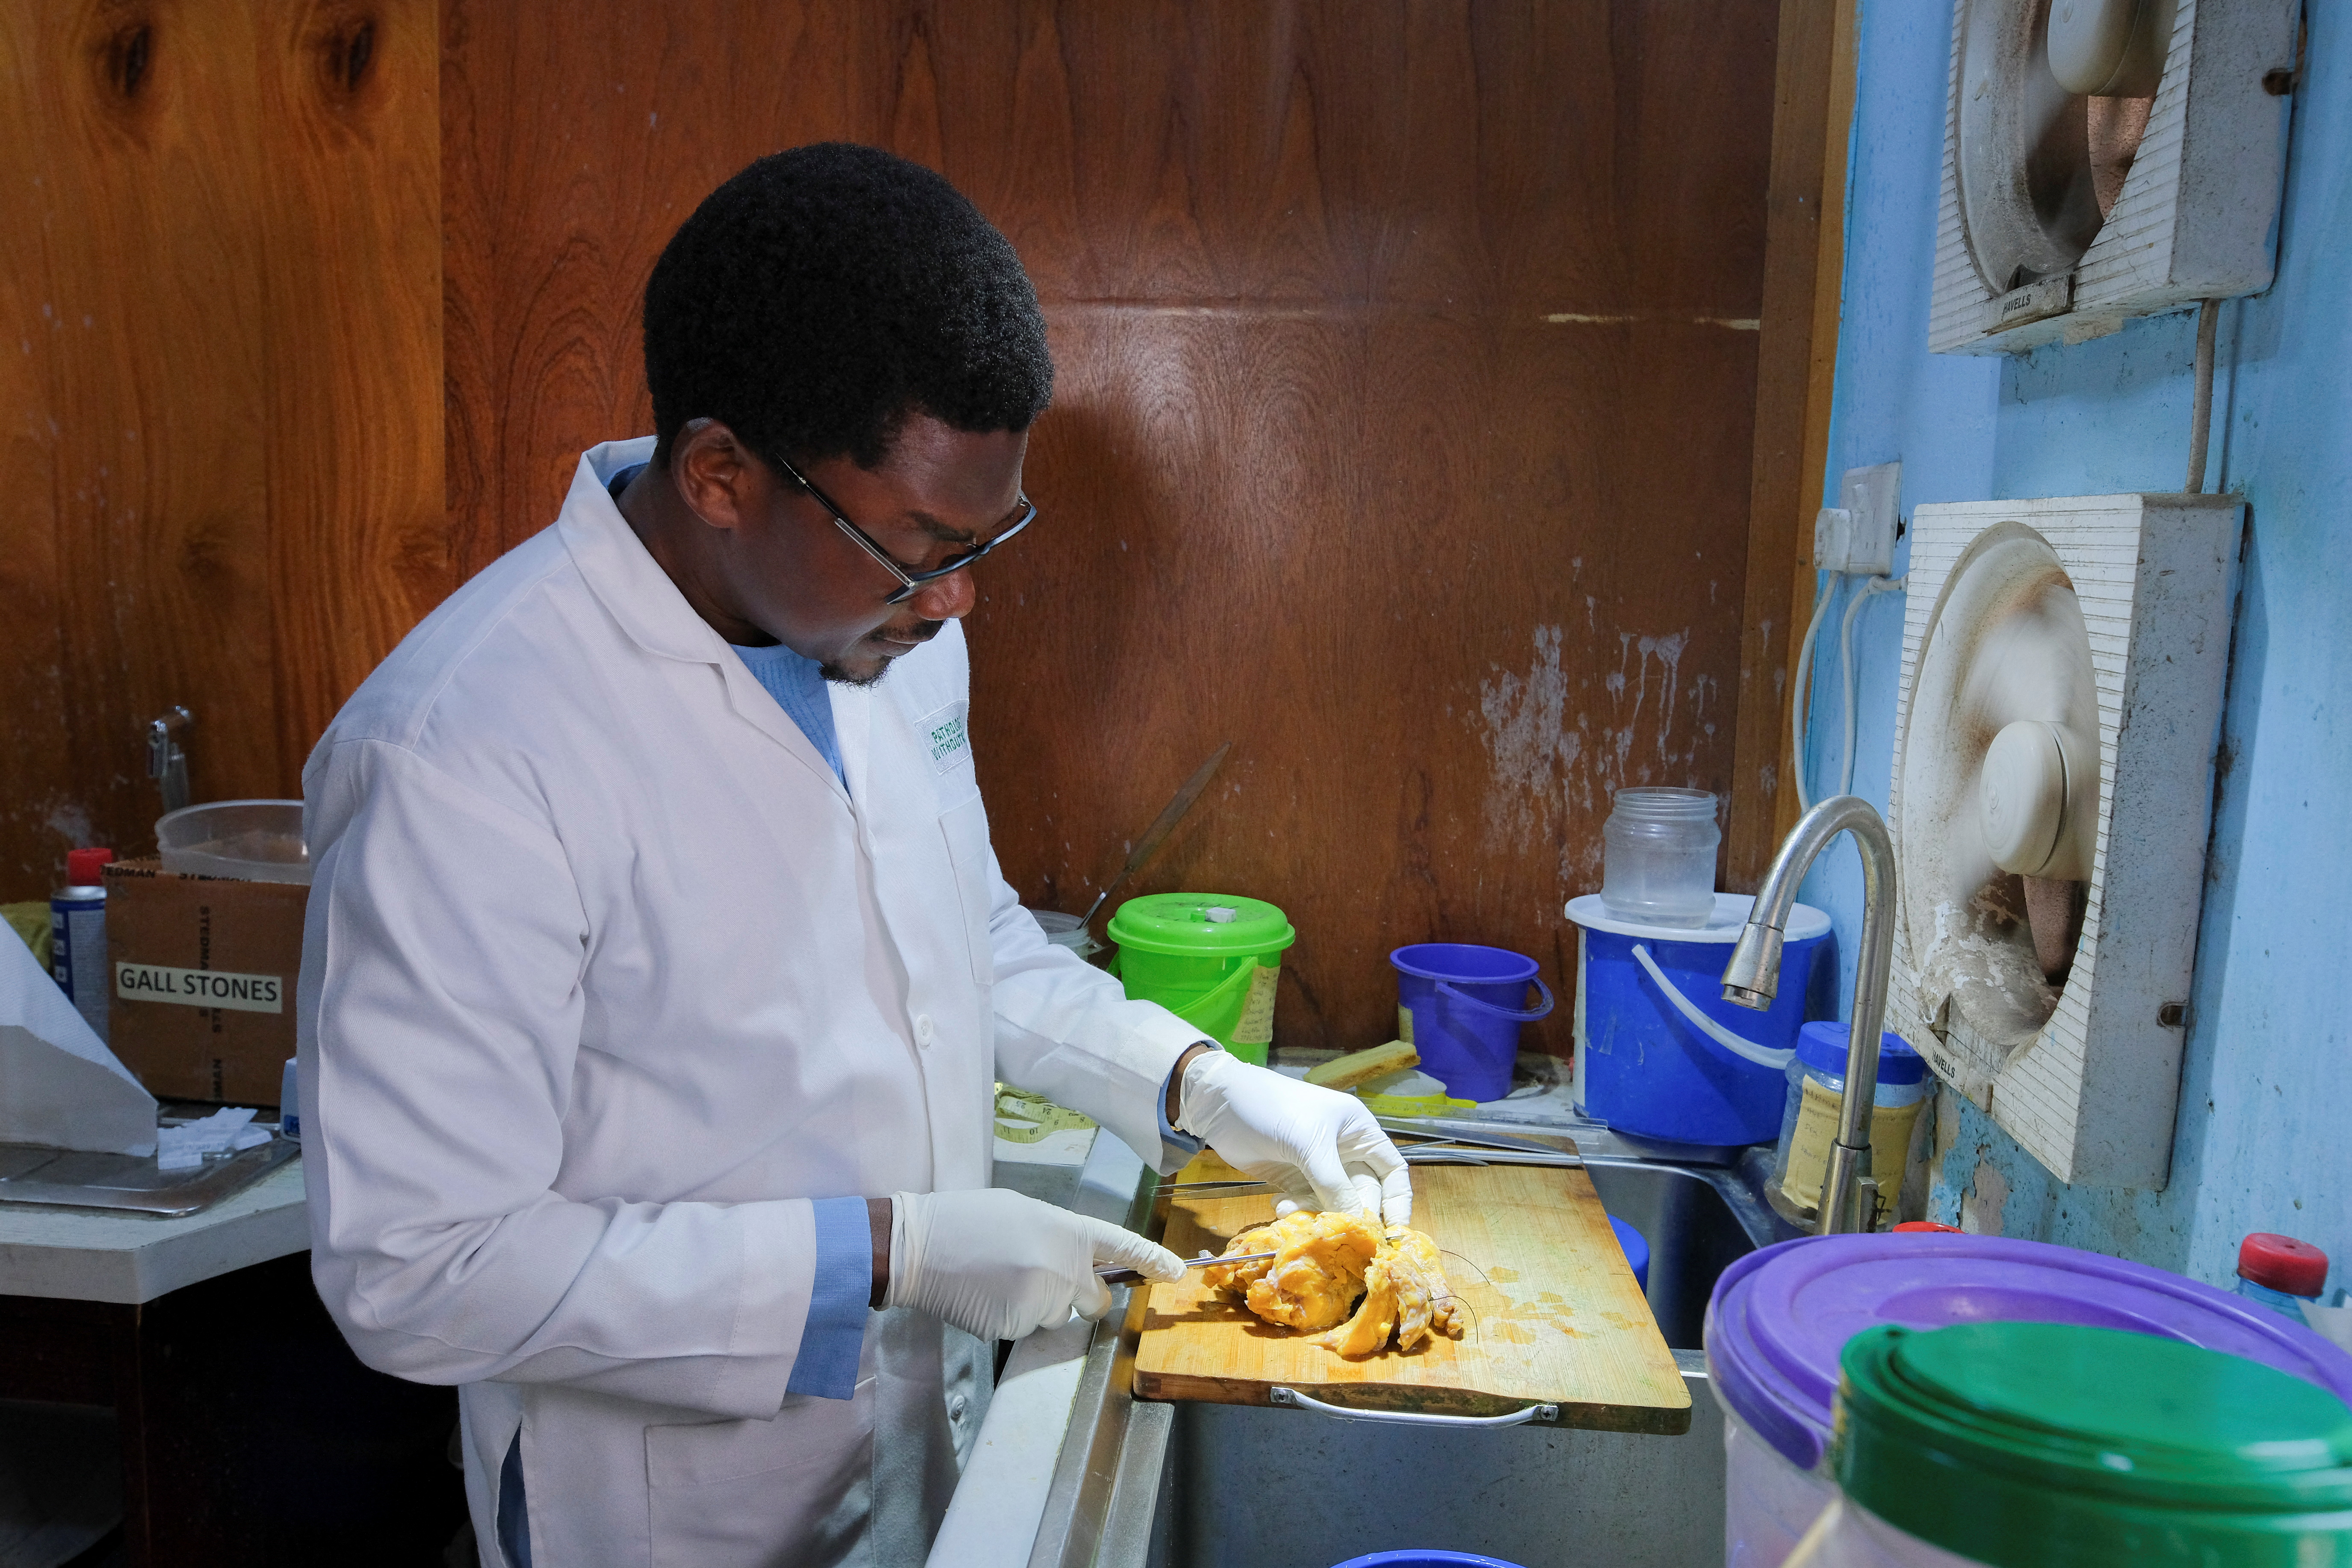 Dr. Kafui Akakpo, a pathologist, observes a breast lump with a tumour at the Pathologists Without Borders laboratory in Accra